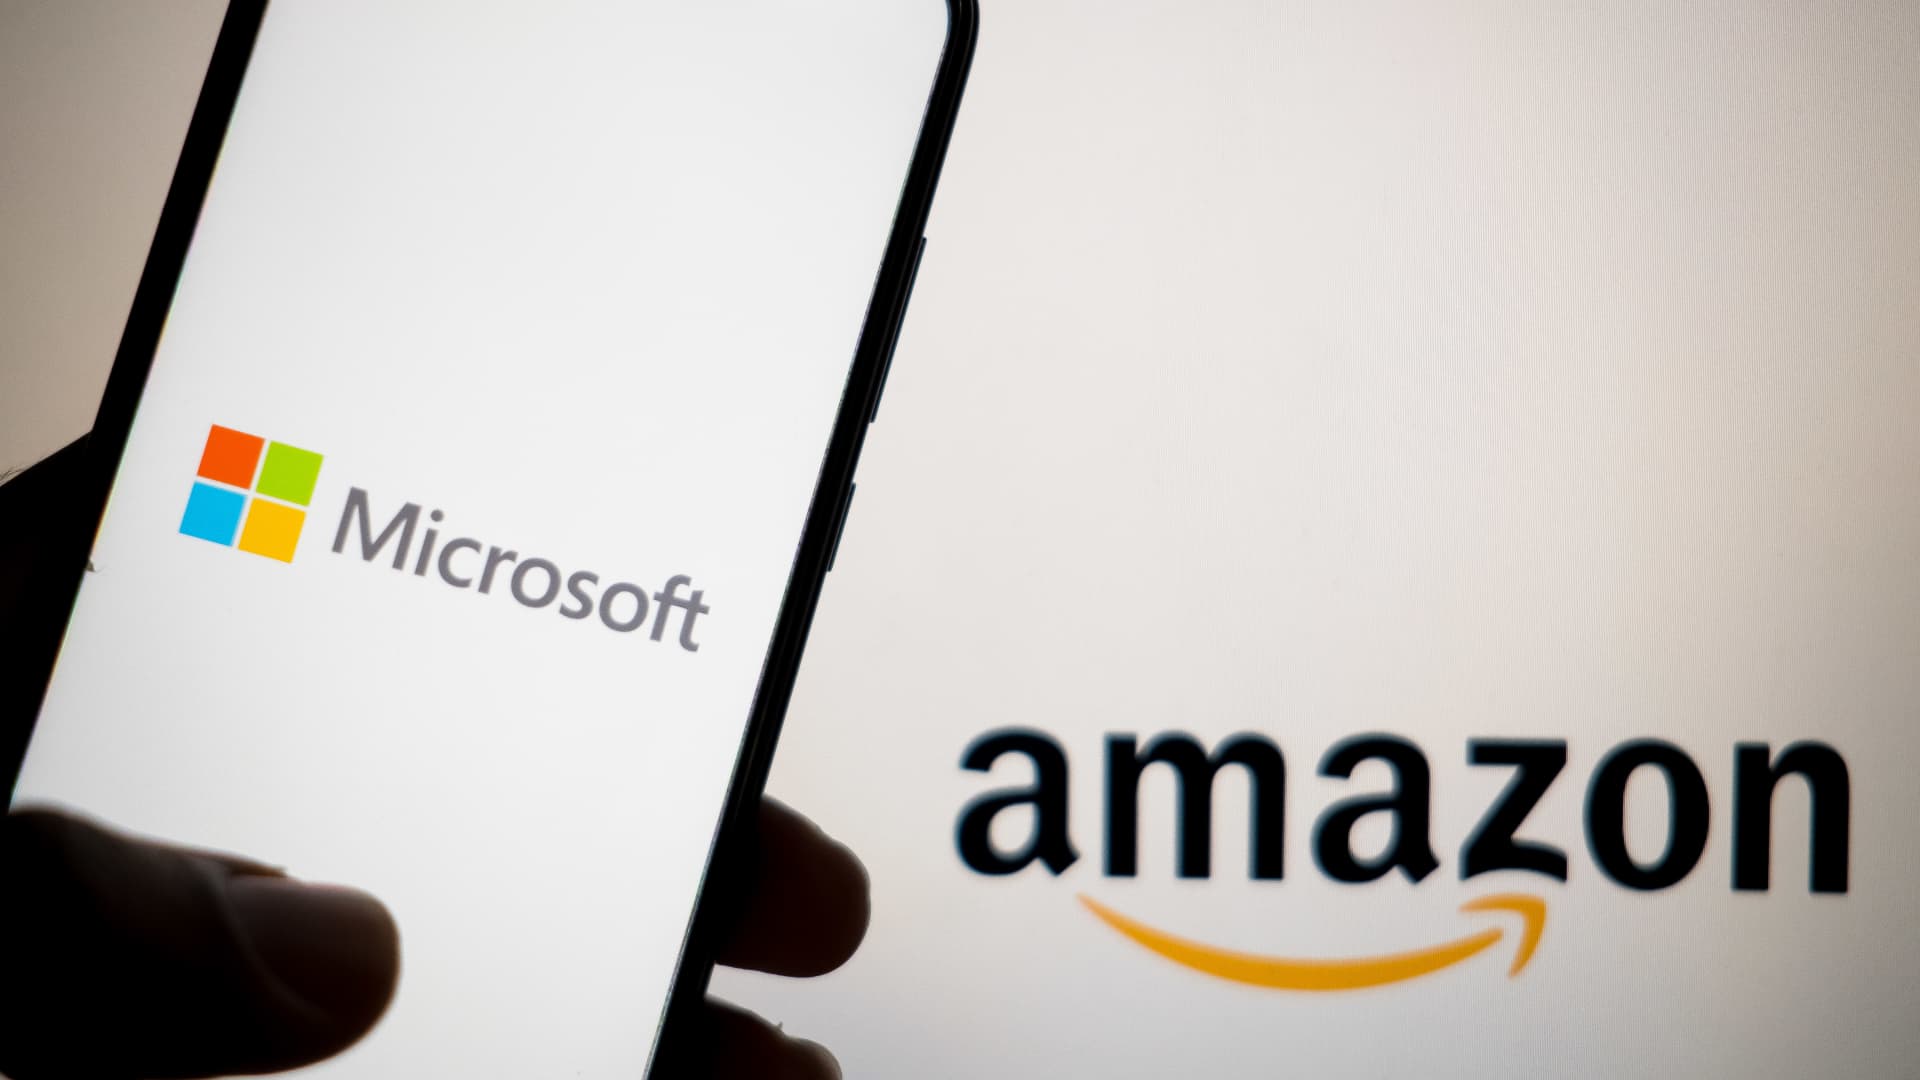 Microsoft and Amazon to invest .6 billion into France as Macron courts tech giants